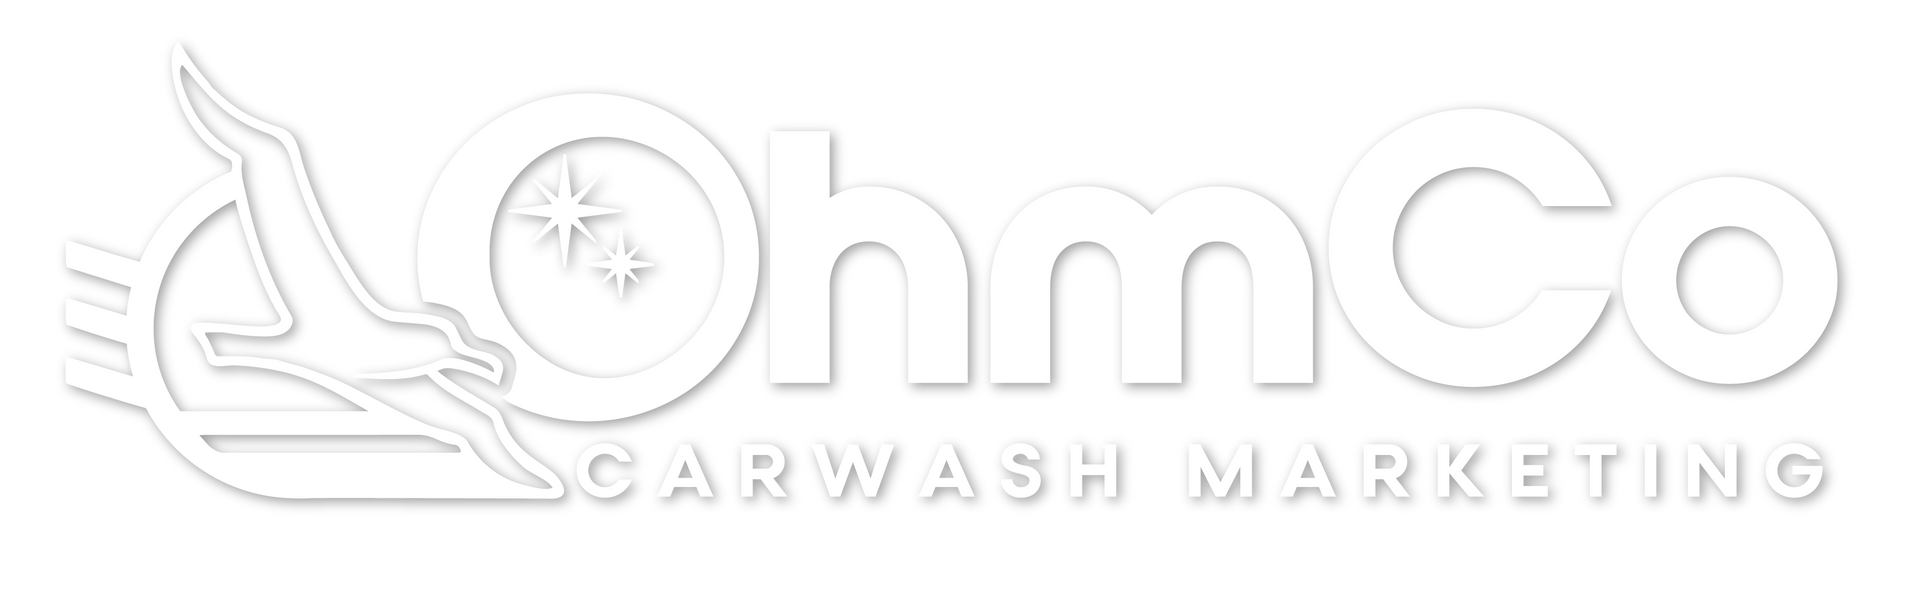 Ohmco carwash websites and a carwash social media platform. Get powerful tools for marketing your carwash, selling memberships, and carwash giftcards.